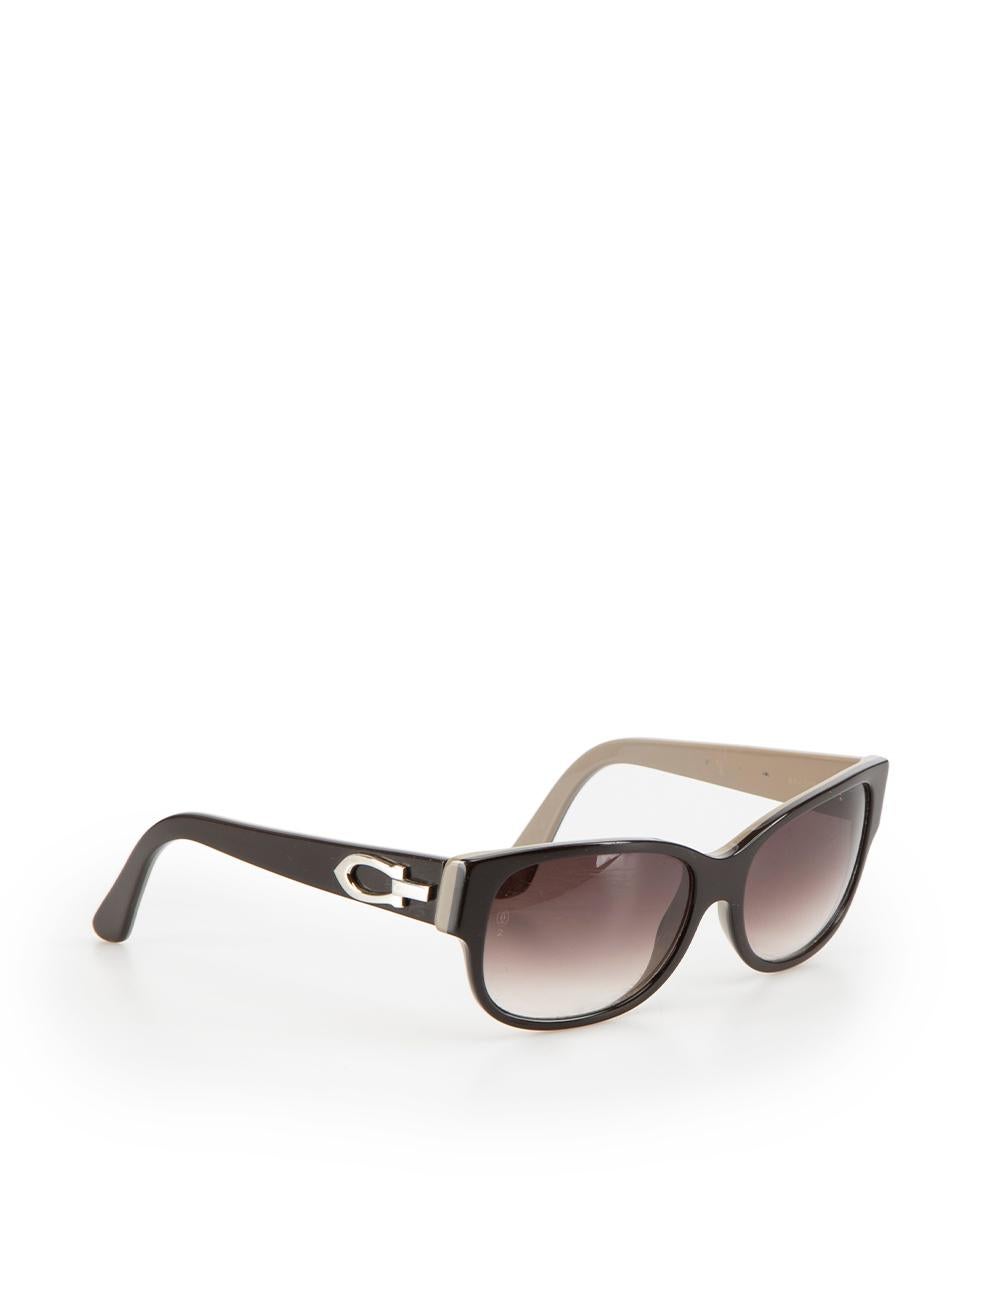 CONDITION is Very good. Minimal wear to sunglasses is evident. Minimal indentations to arms on this used Cartier designer resale item.



Details


Brown

Plastic

Sunglasses

Rectangle frame

Silver logo on the arms

Gradient black lens



 

Made